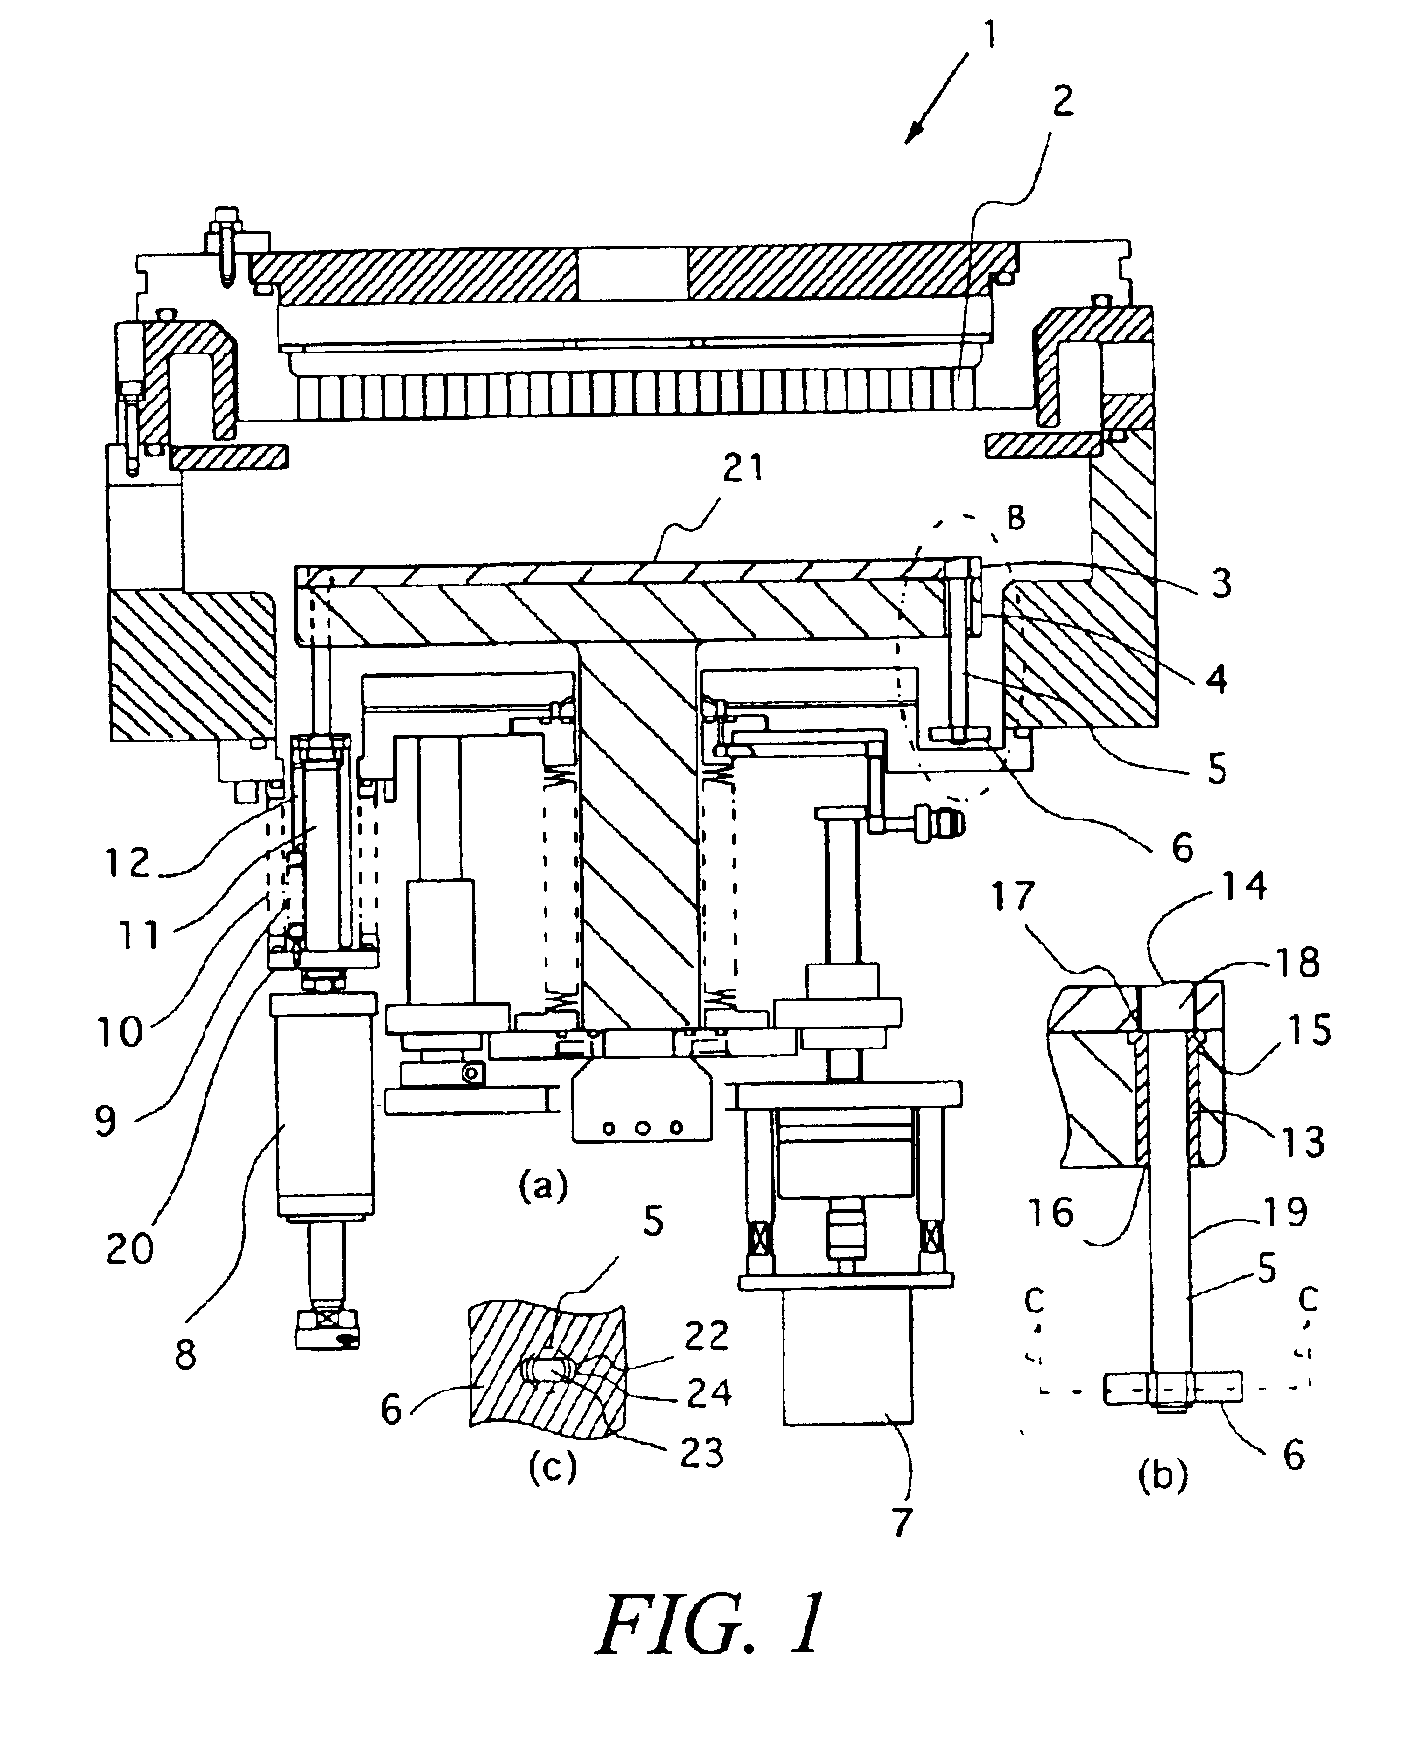 Semiconductor-processing reaction chamber